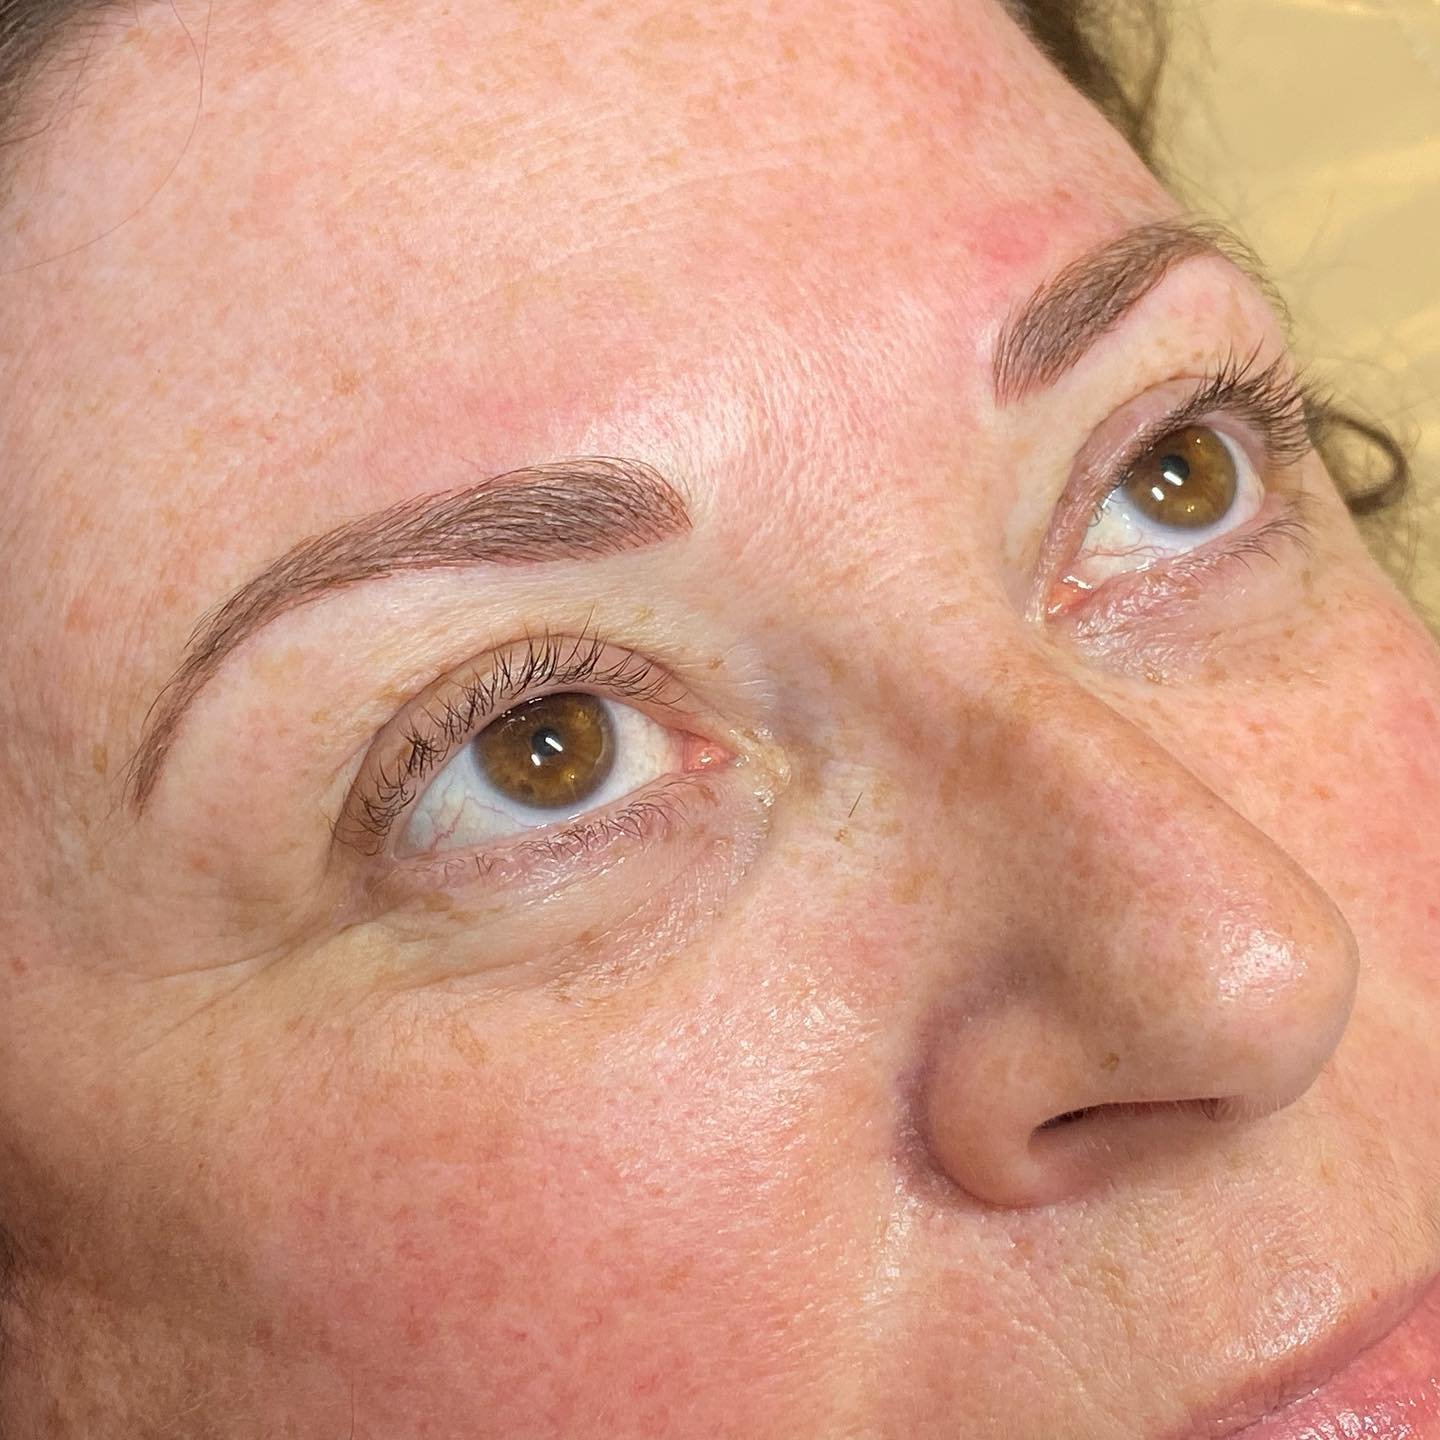 Refreshed brows - it&rsquo;s important to keep your brows topped up every year or two, this keeps them looking their best. I originally created this brow two years ago, it faded slightly with little colour change. This colour boost touch up has just 